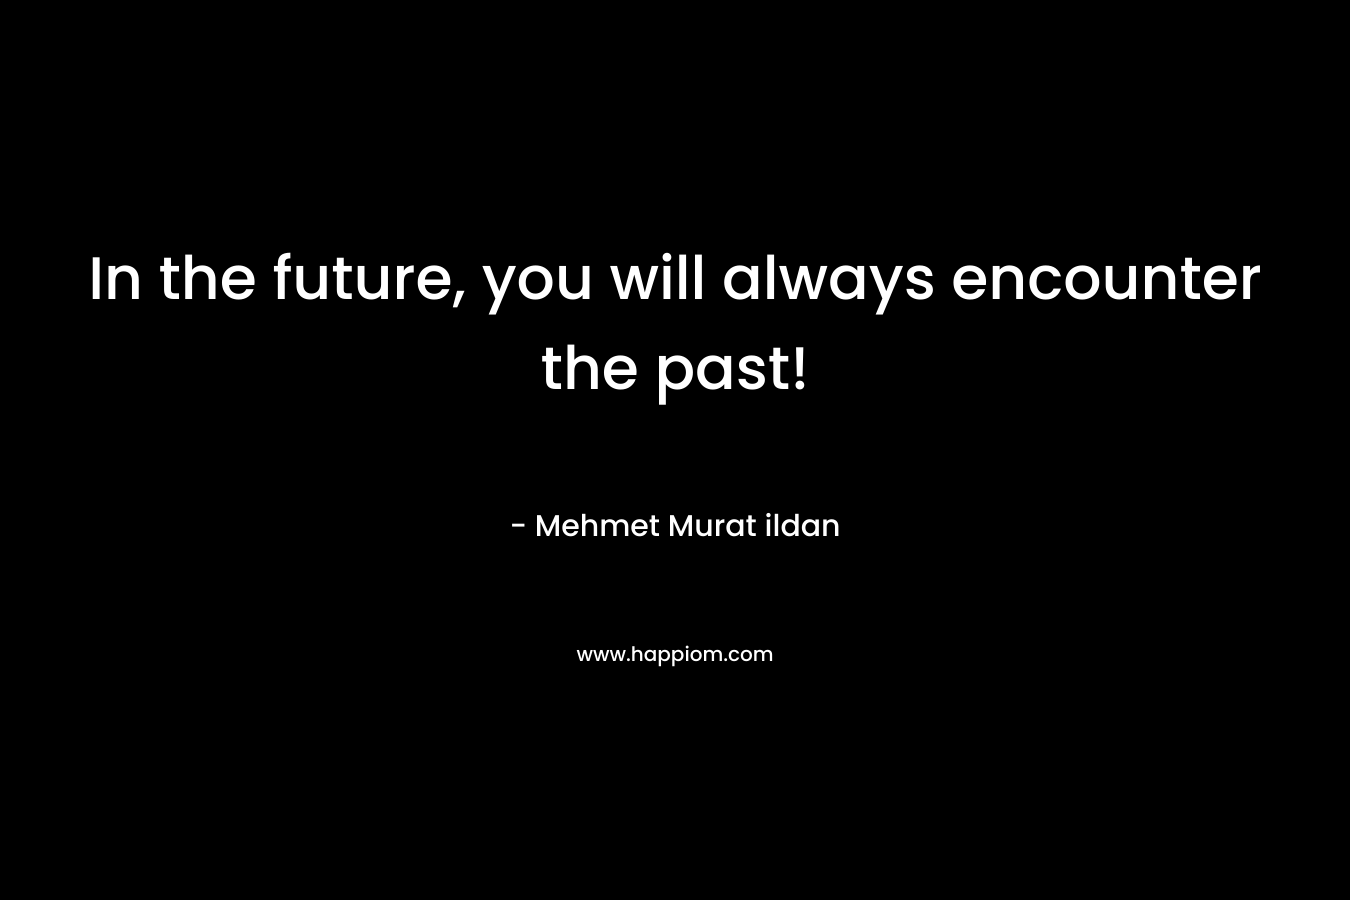 In the future, you will always encounter the past!